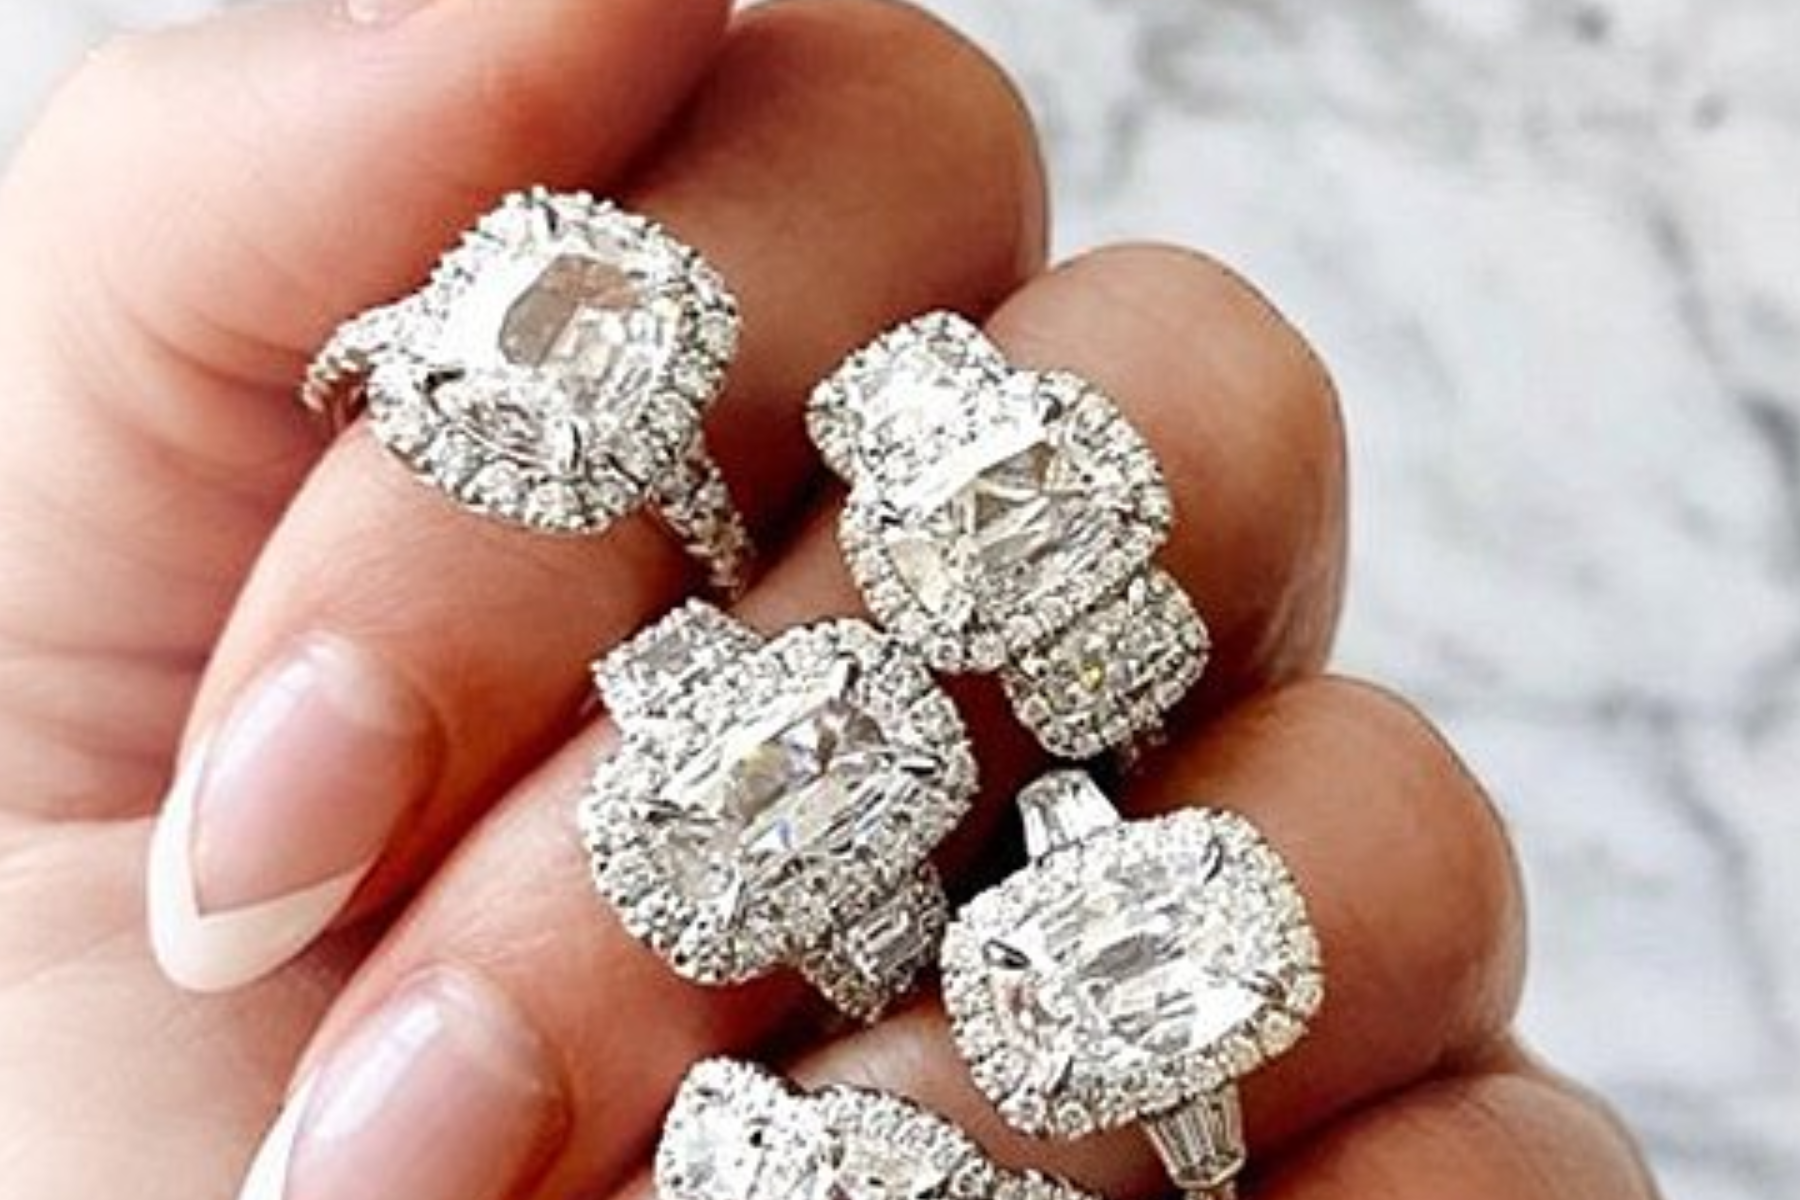 Five halo diamond rings adorn the fingers of a woman